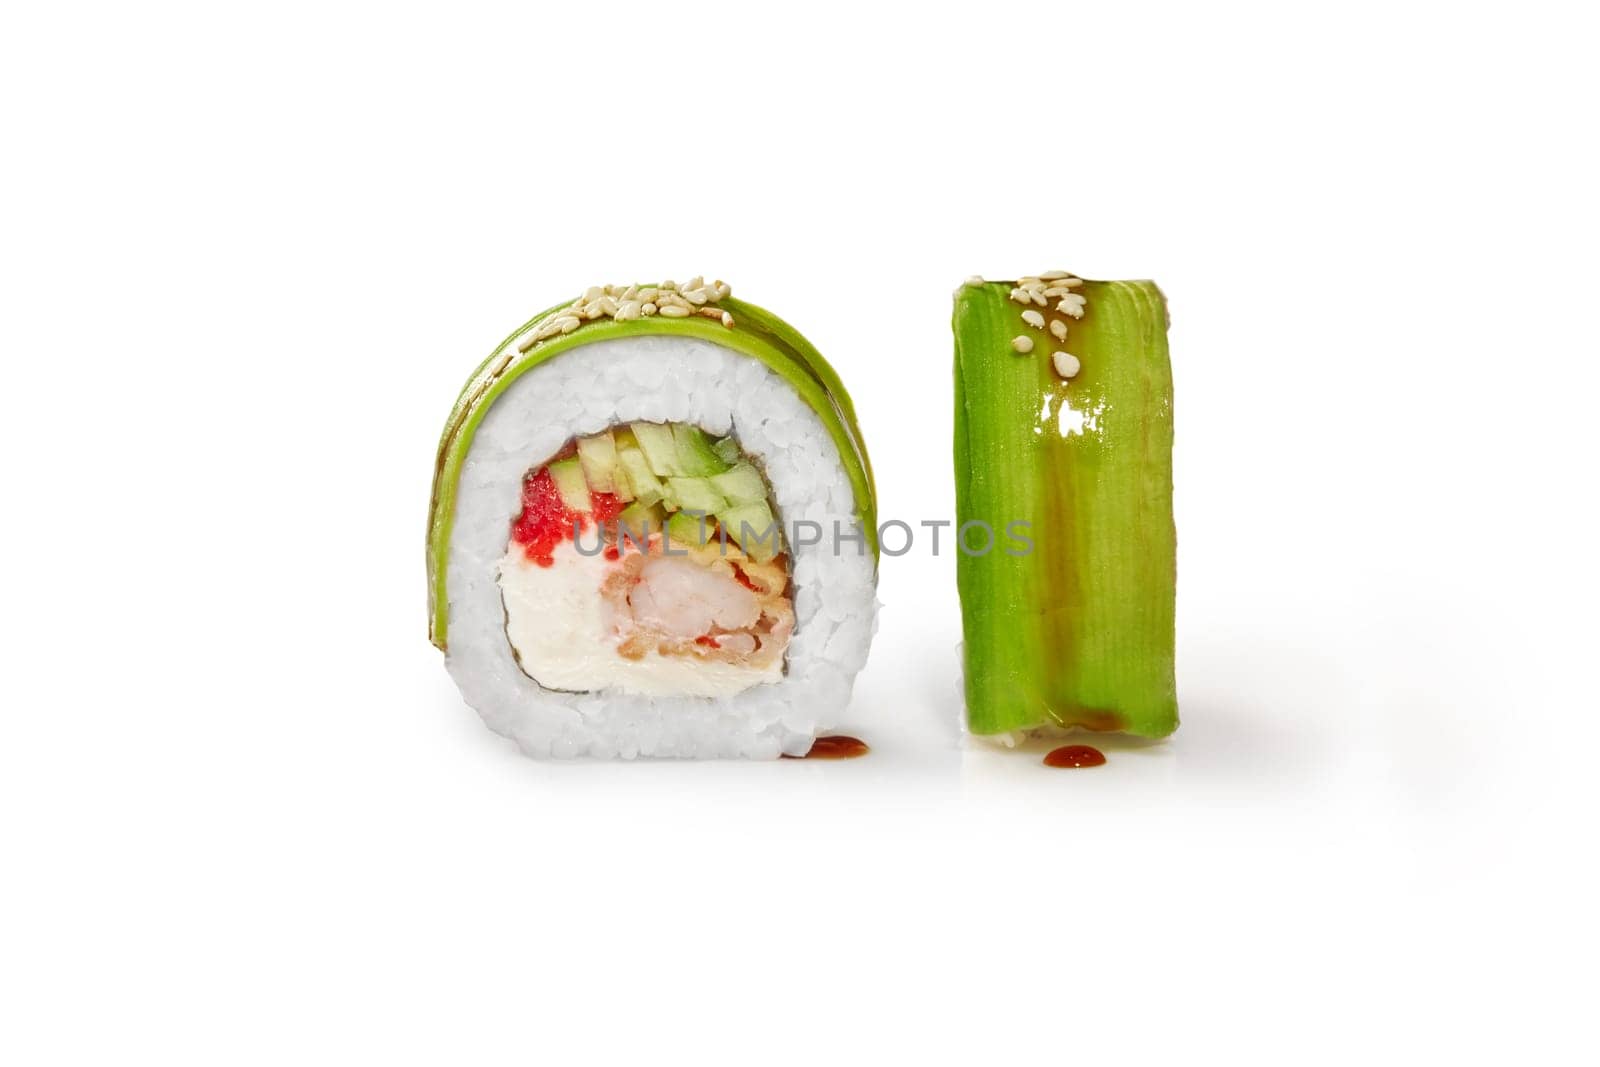 Closeup of appetizing sushi roll filled with tempura shrimp, cream cheese, cucumber and tobiko roe wrapped in thin avocado slices, isolated on white background